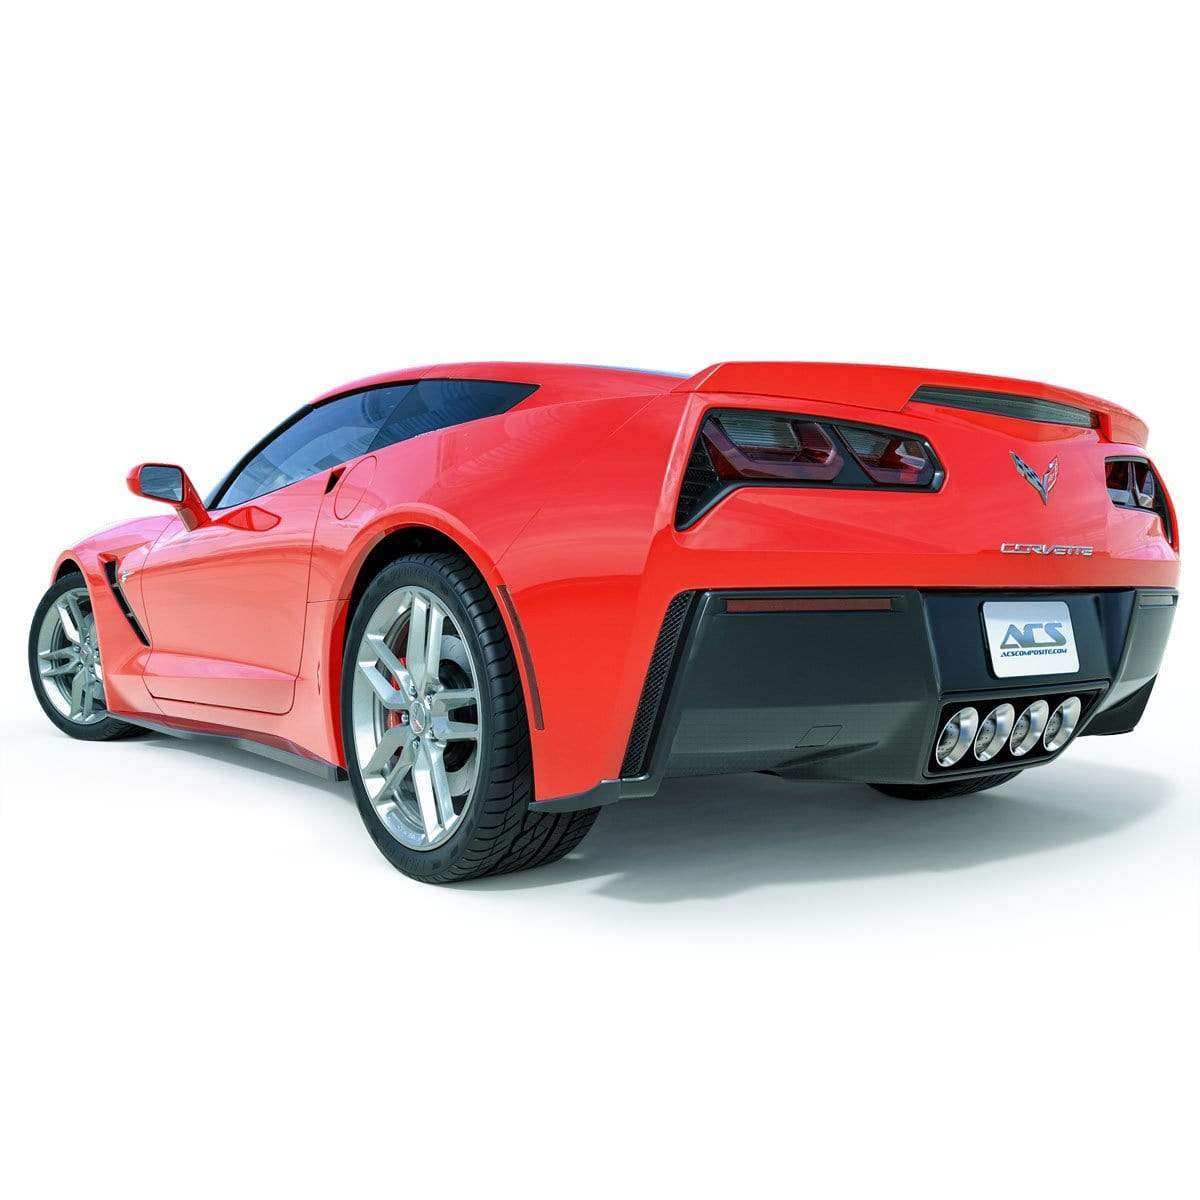 Stingray Rear Fascia Extensions for C7 Corvette - SKU [45-4-181]CFZ - Enhance ground effects and complete your aero package.